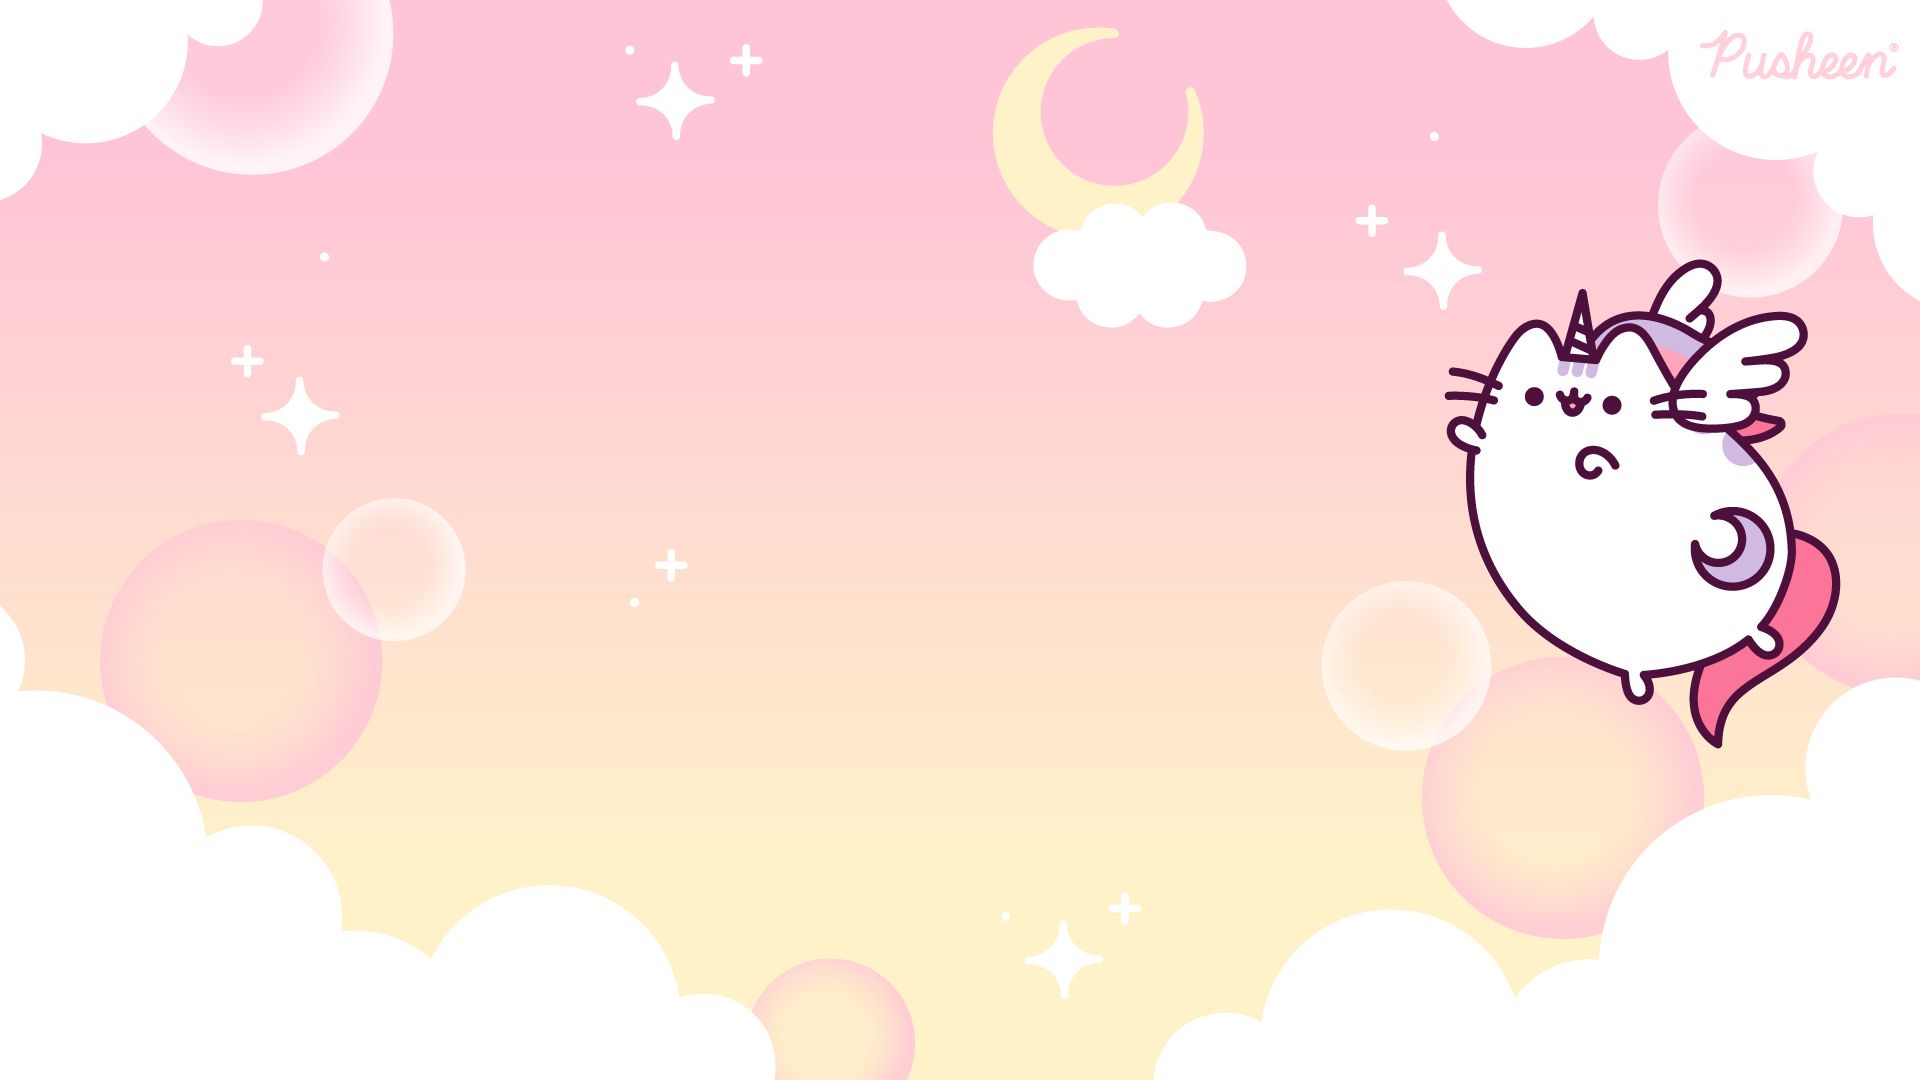 Pusheen the Fluffy Cat's Wallpaper Free Image & Picture